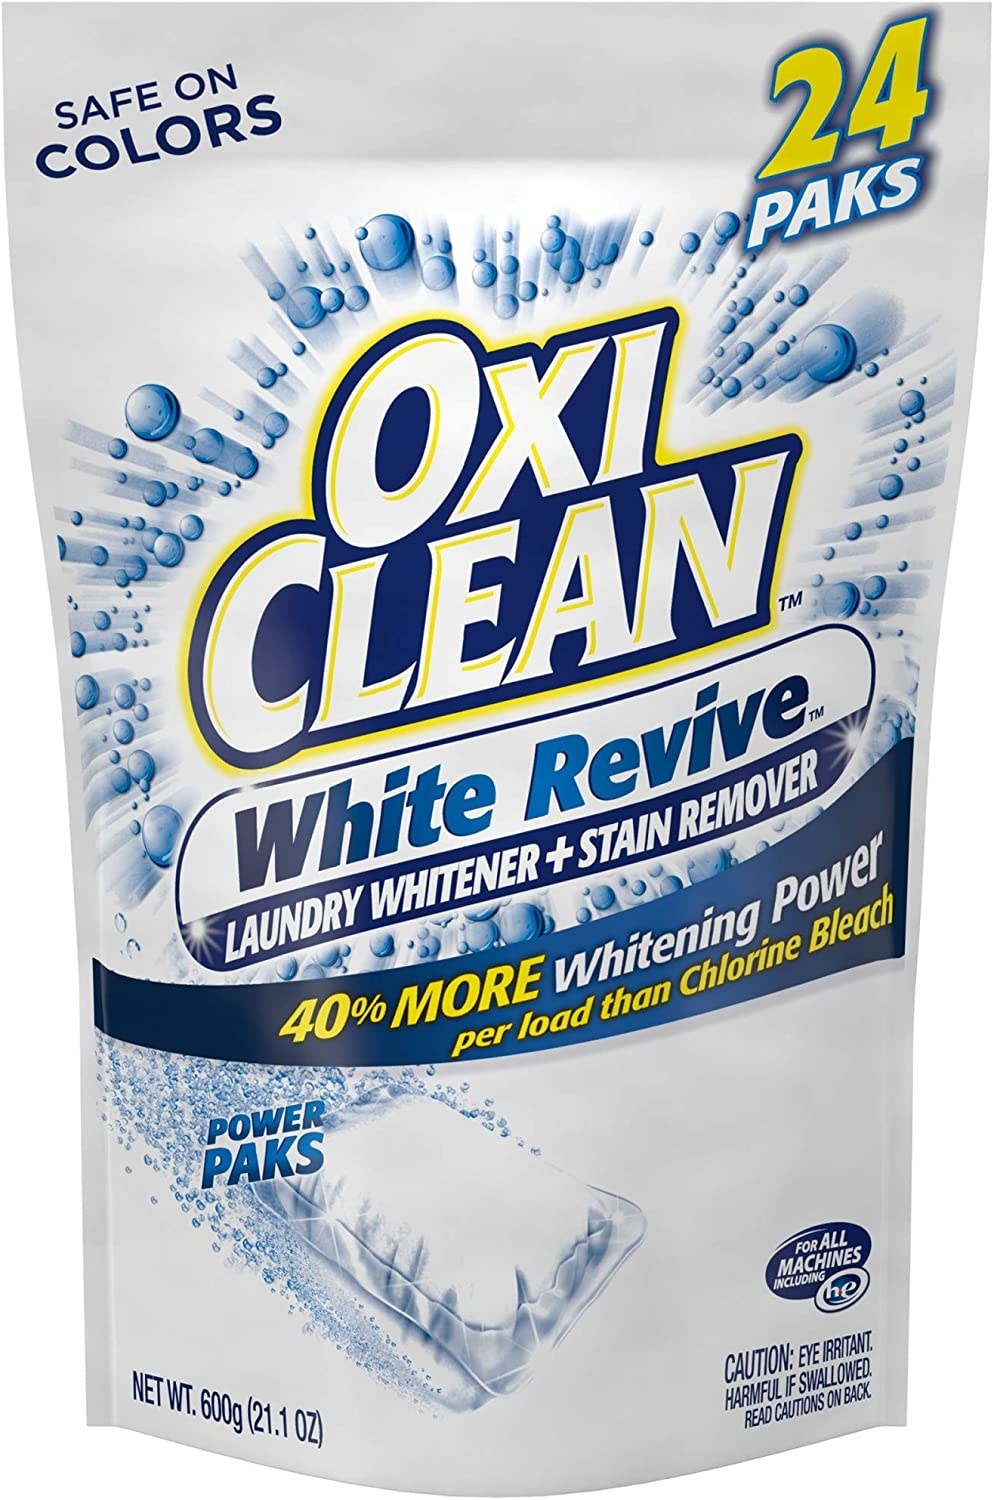 The bag of oxi clean packs 